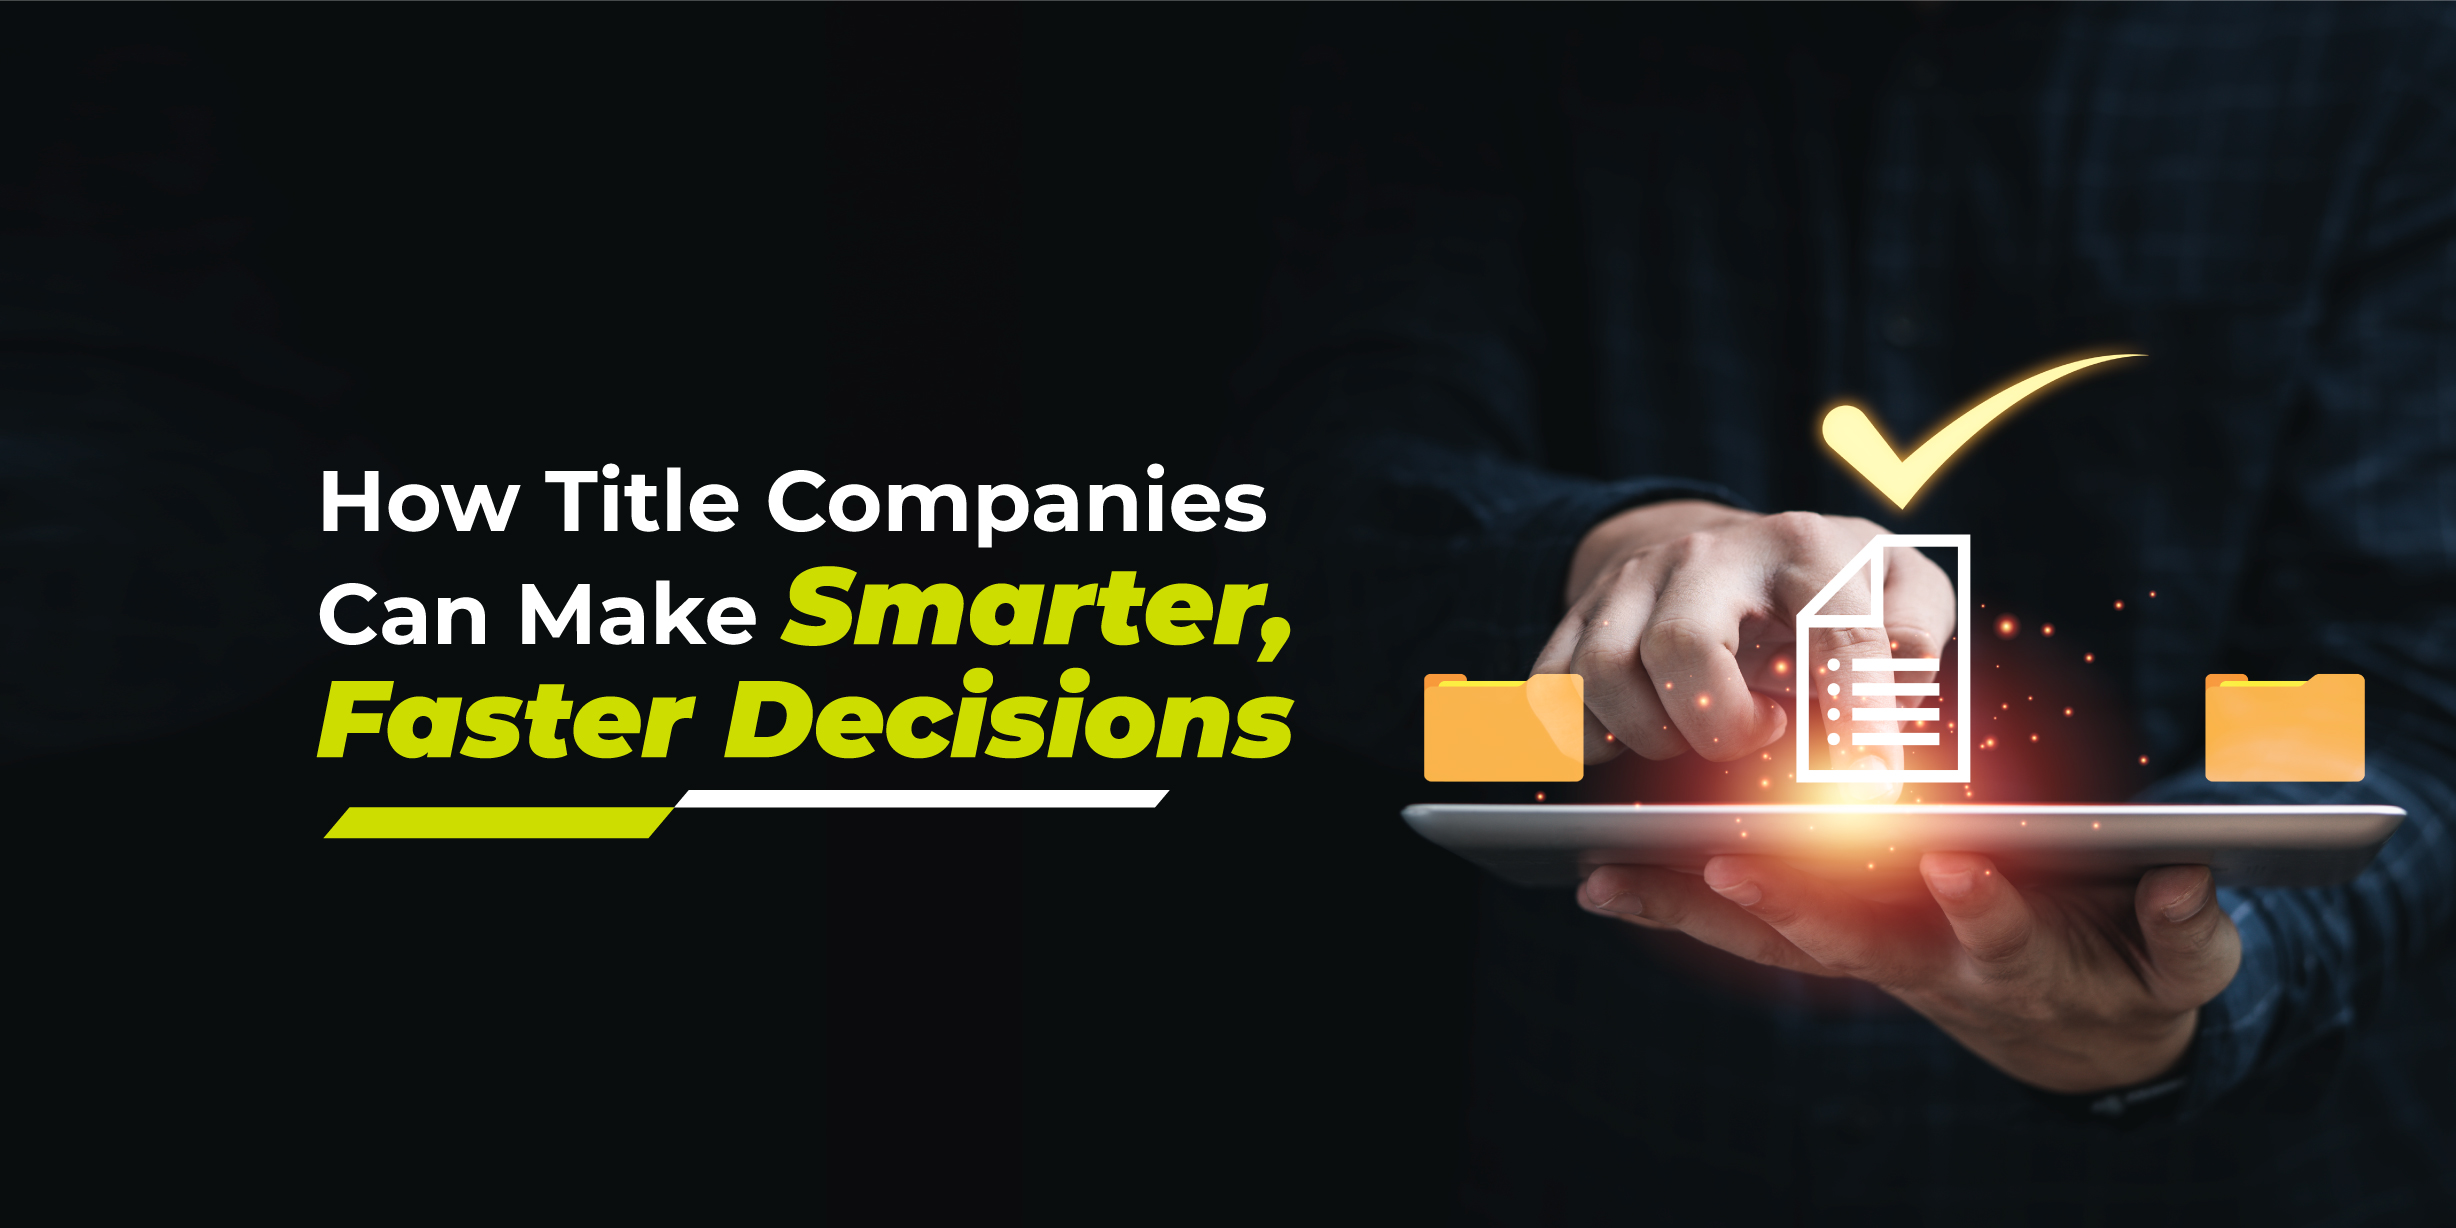 How Title Companies Can Make Smarter, Faster Decisions